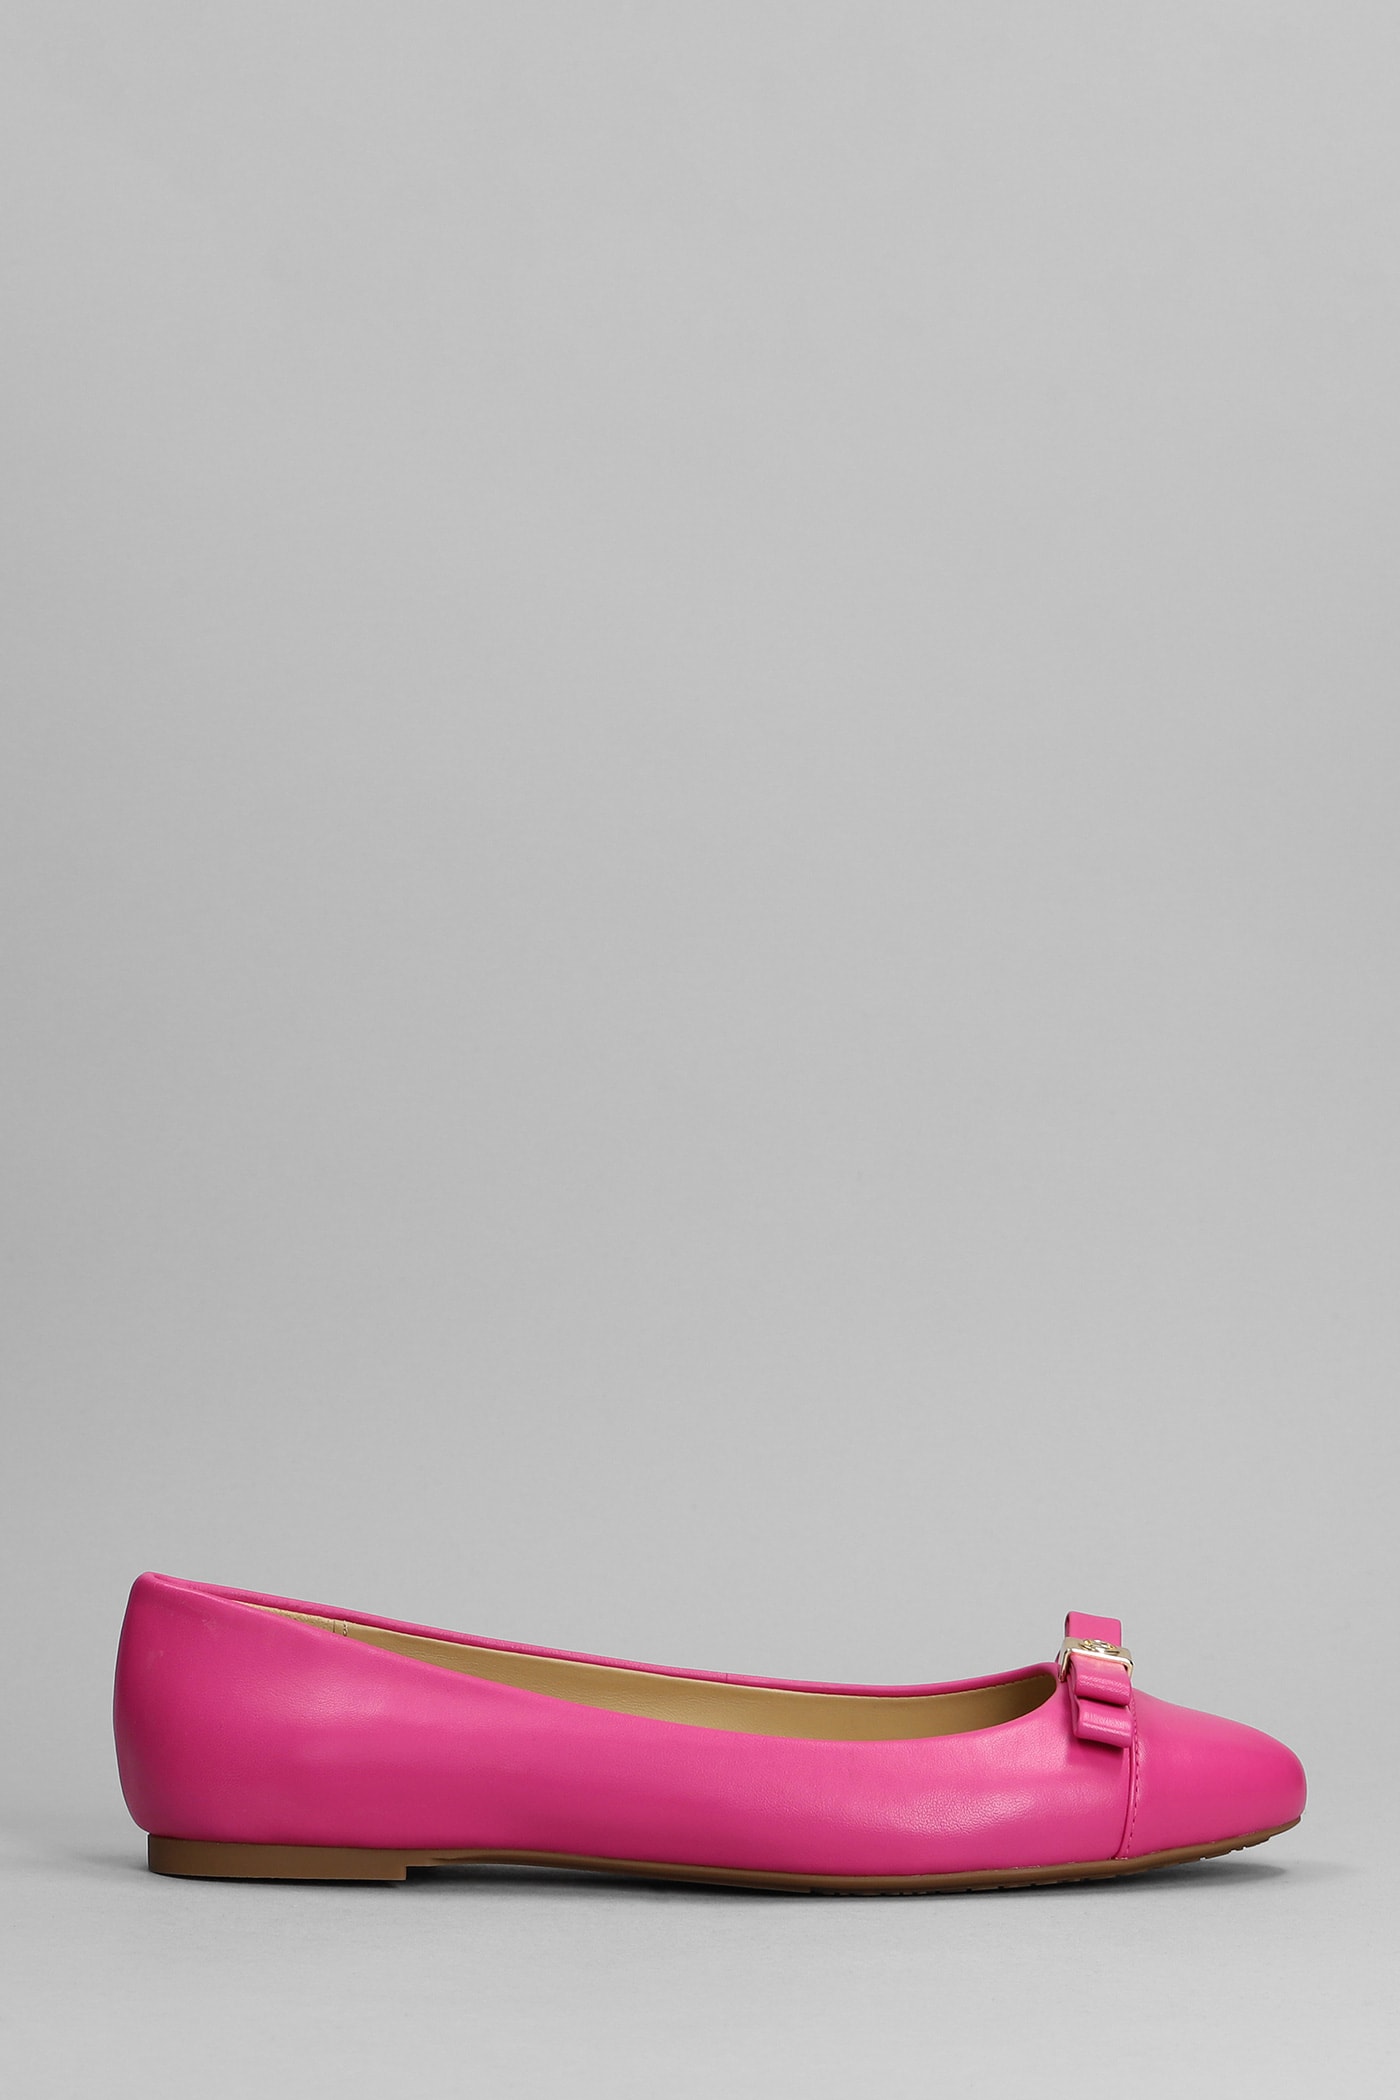 MICHAEL KORS ANDREA BALLET FLATS IN FUXIA LEATHER